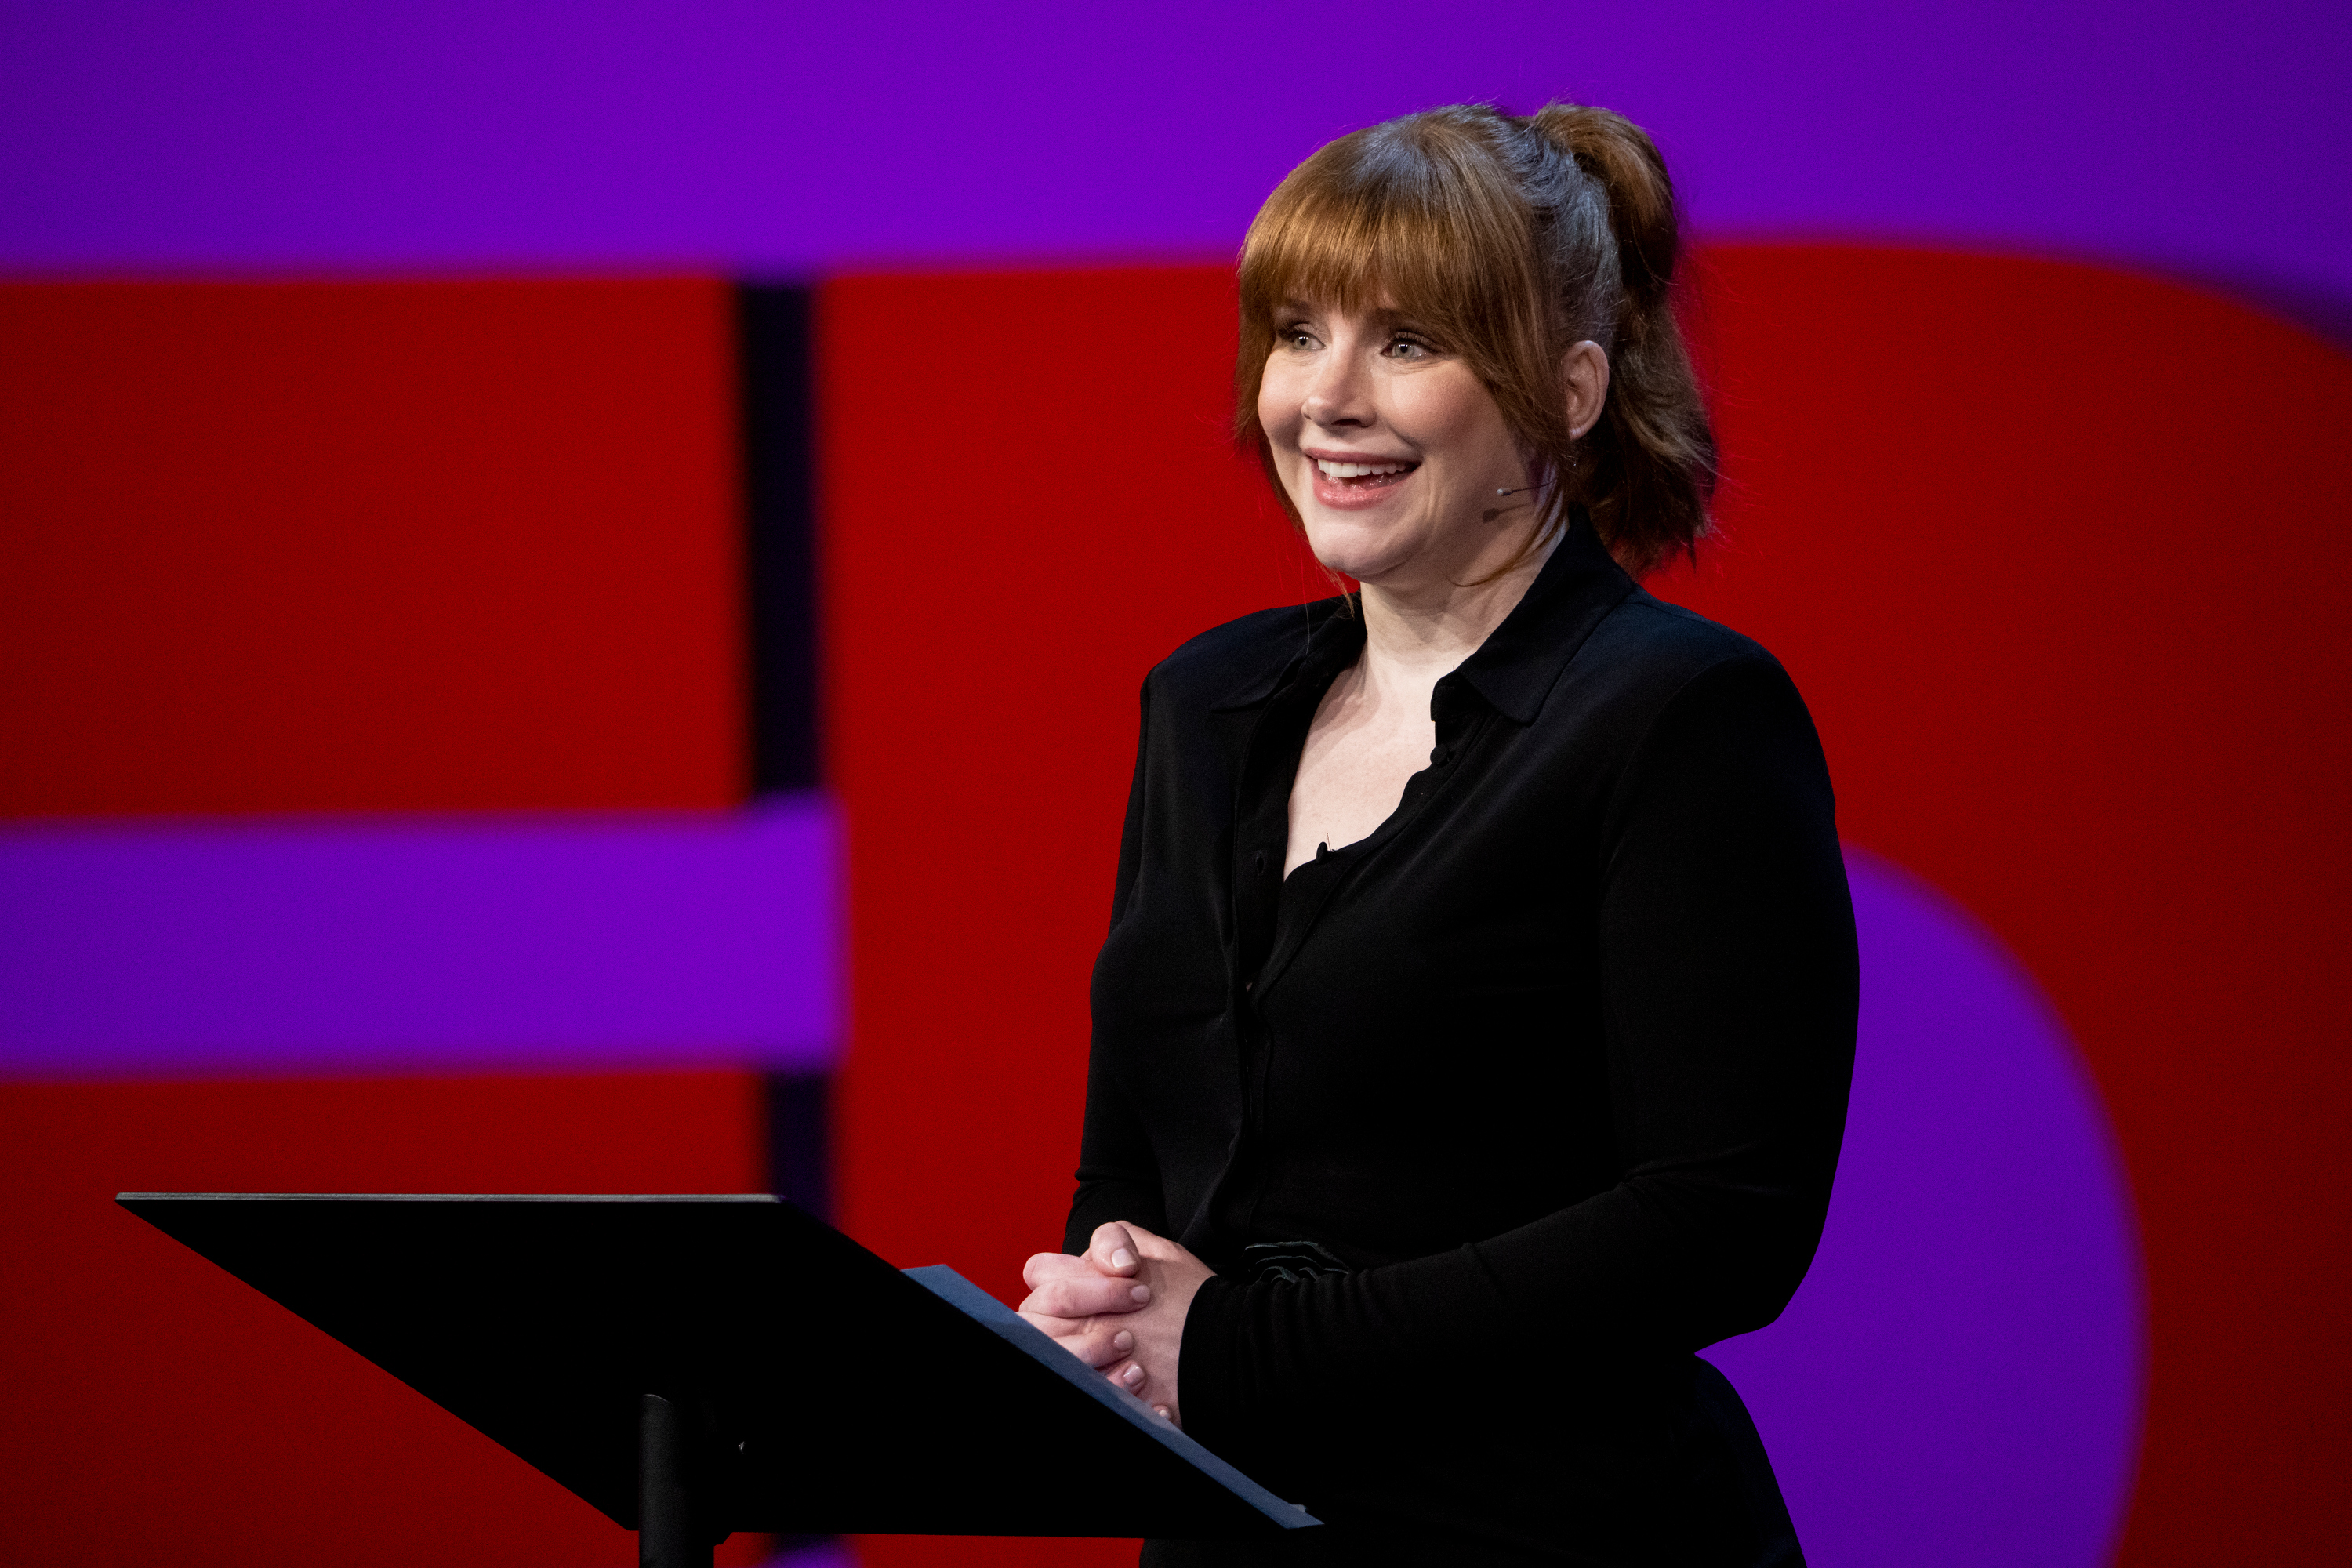 Watch Bryce Dallas Howard’s new TED Talk: How to preserve your
private life in the age of social media